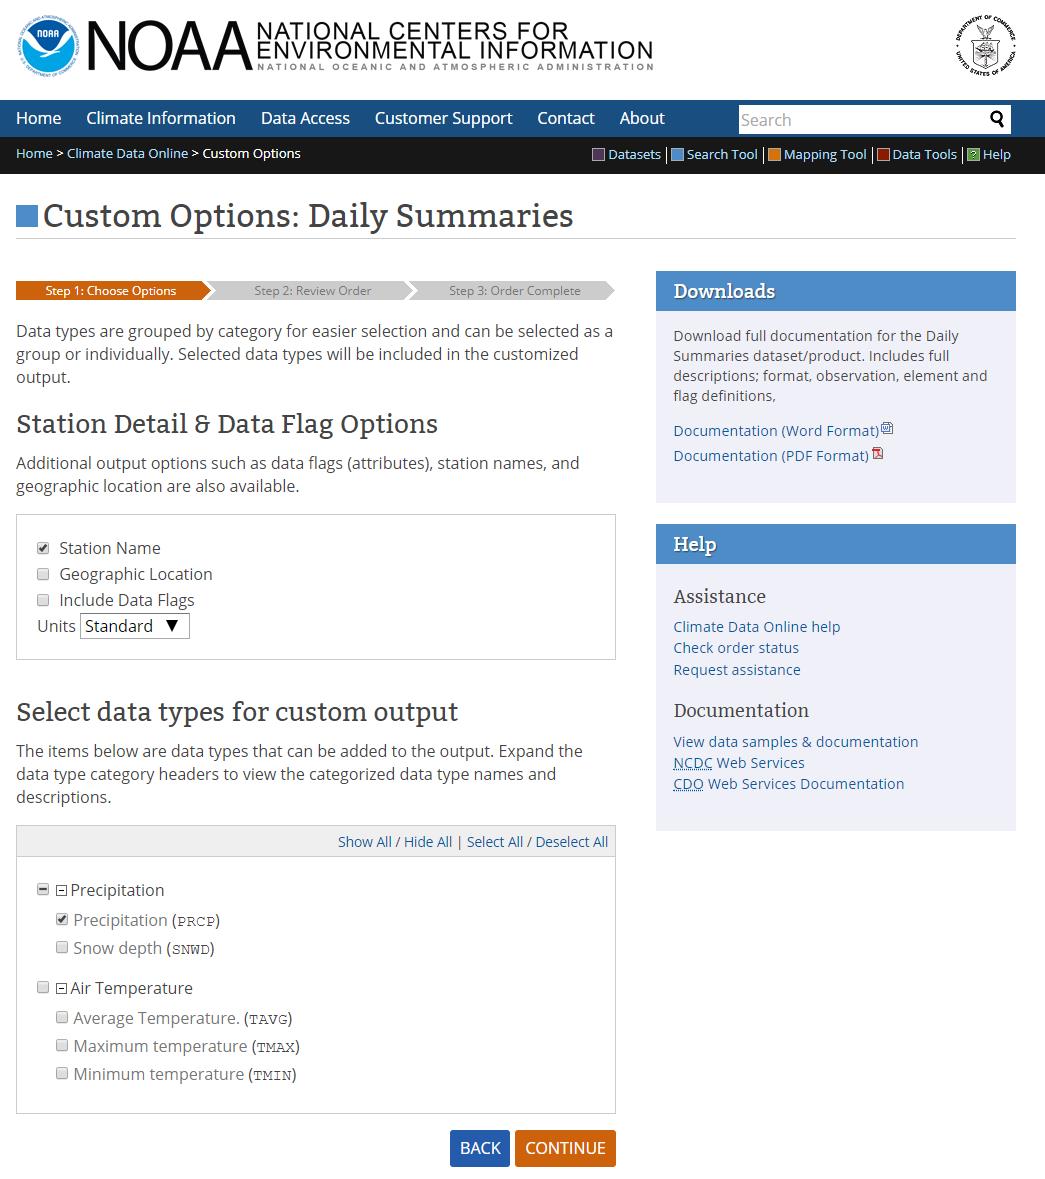 Screenshot of the Custom Options: Daily Summary page. On the left side, there is one Station Detail &amp; Data Flag Options section with three options and there is another section below it, Select data types for custom output with 2 associated options, each has various drop-down choices.